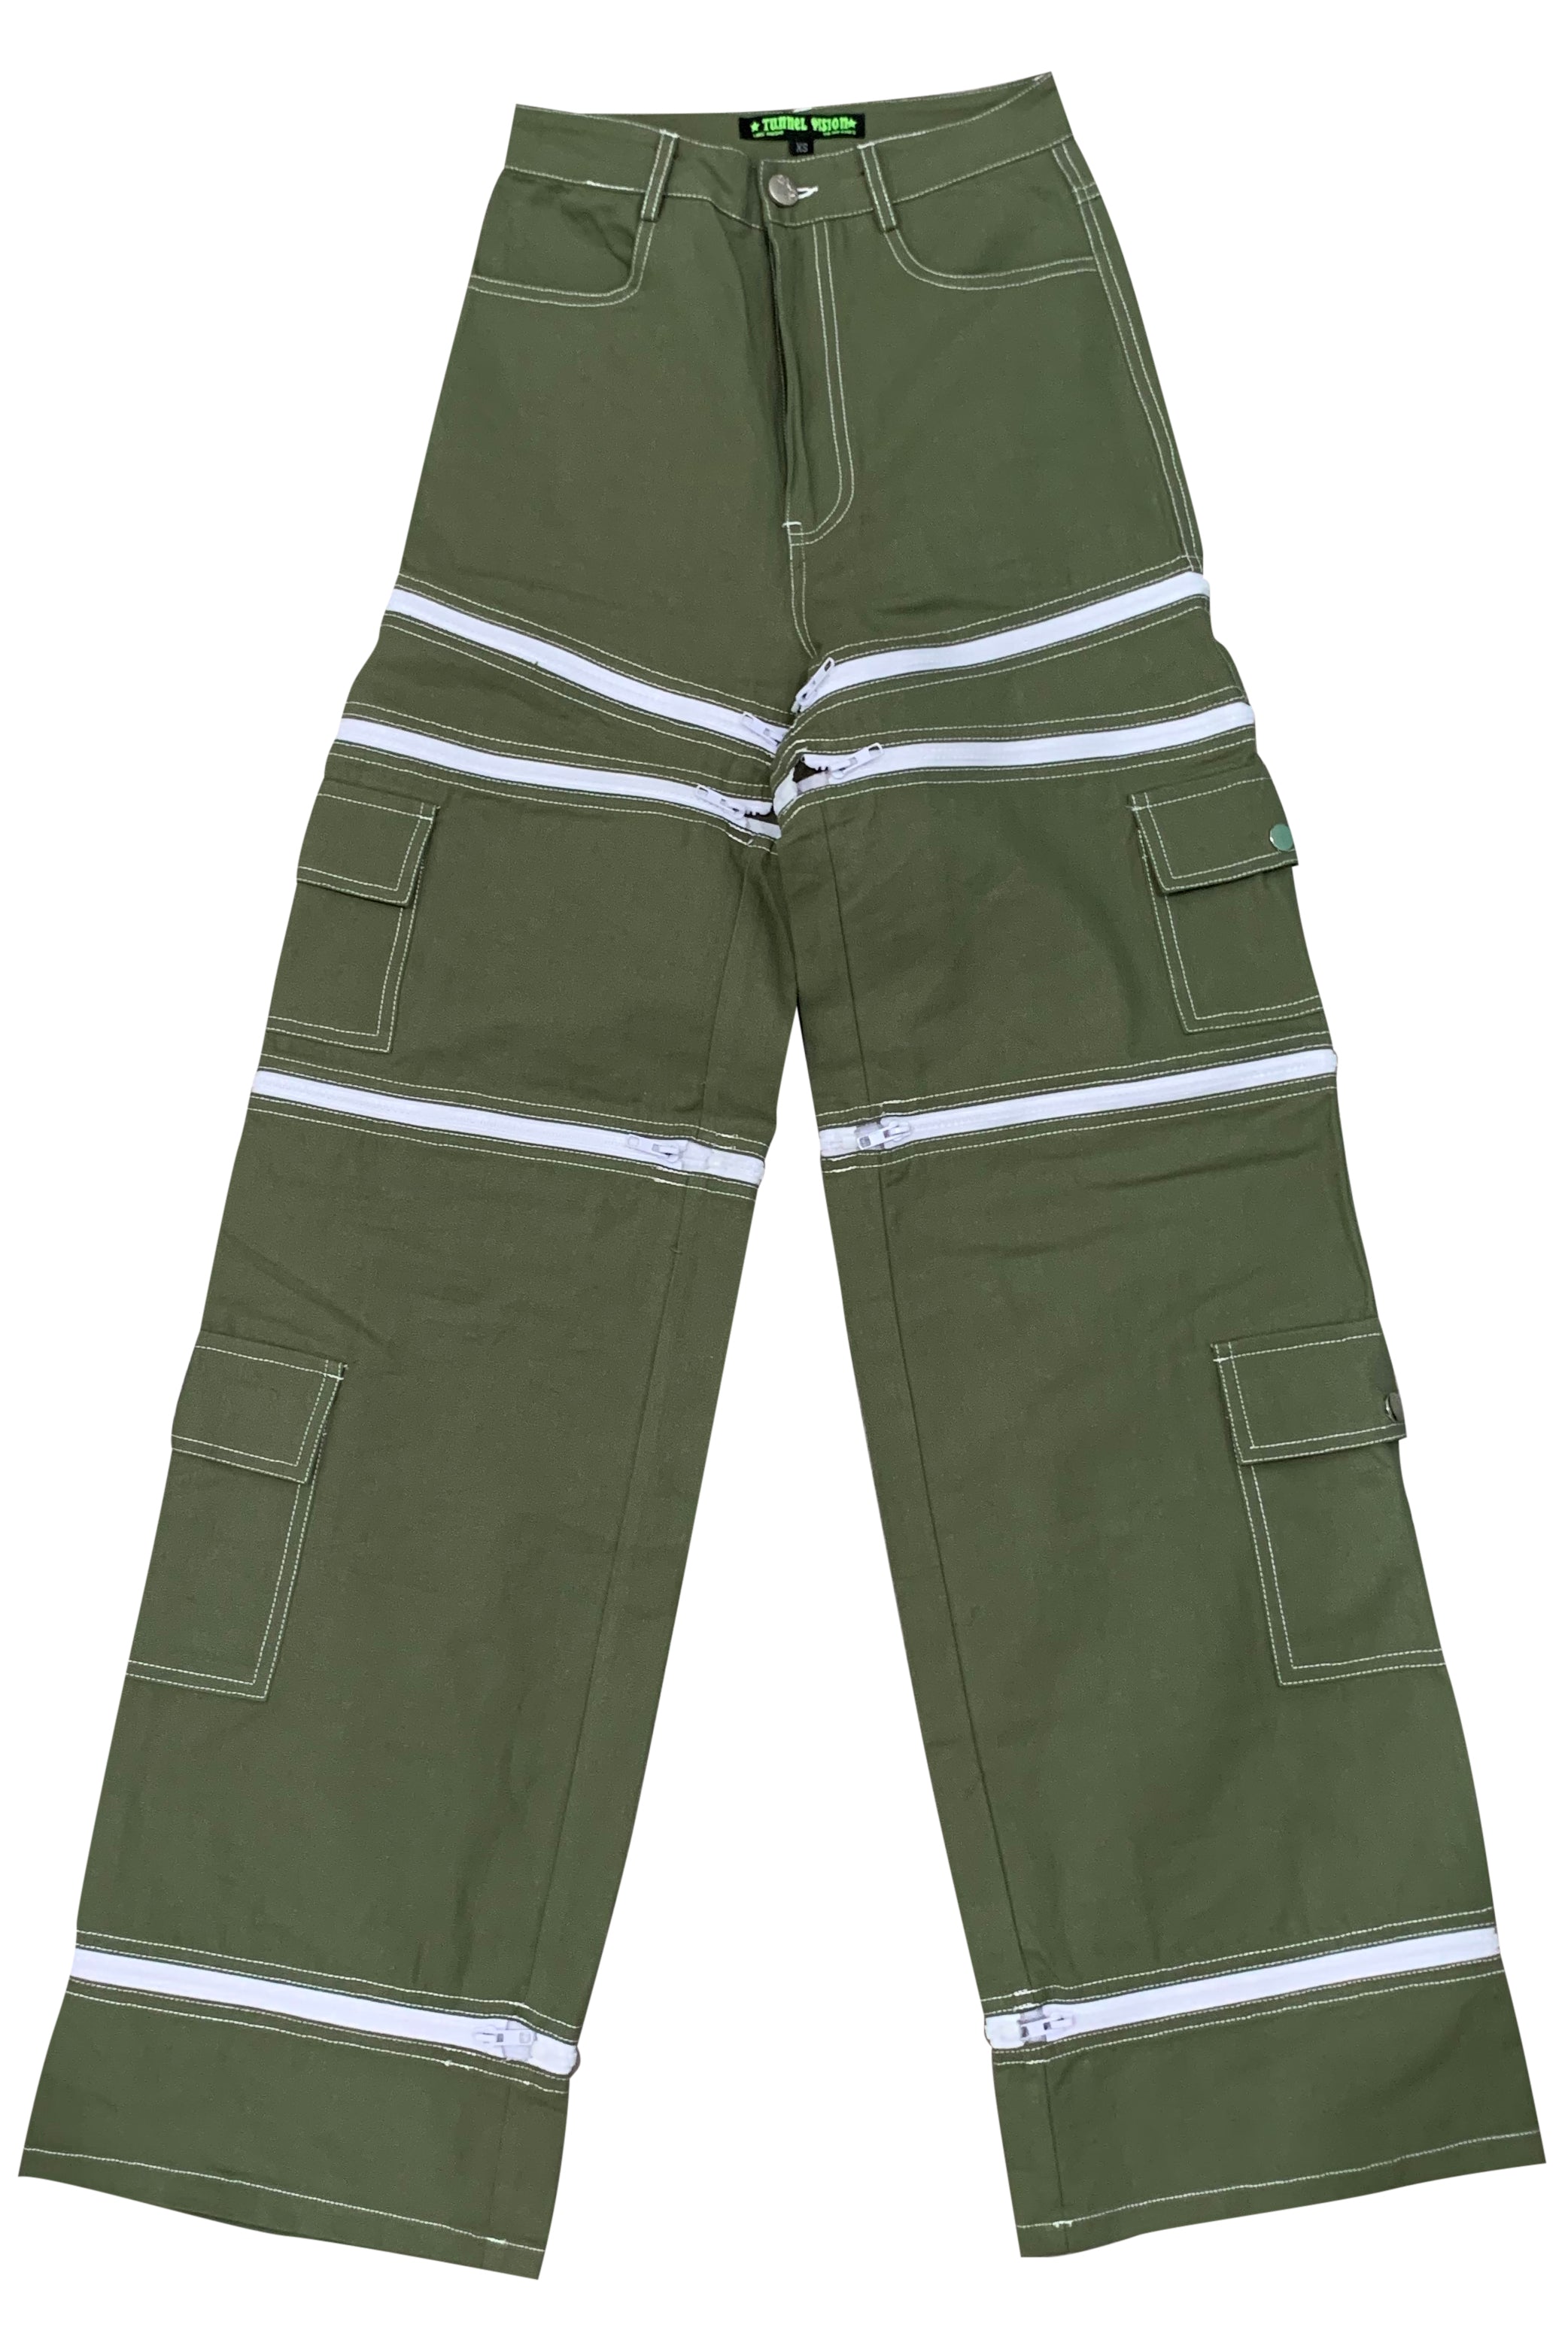 Olive Green 5-in-1 Cargo Tunnel Pants Zip-Off – Vision Convertible